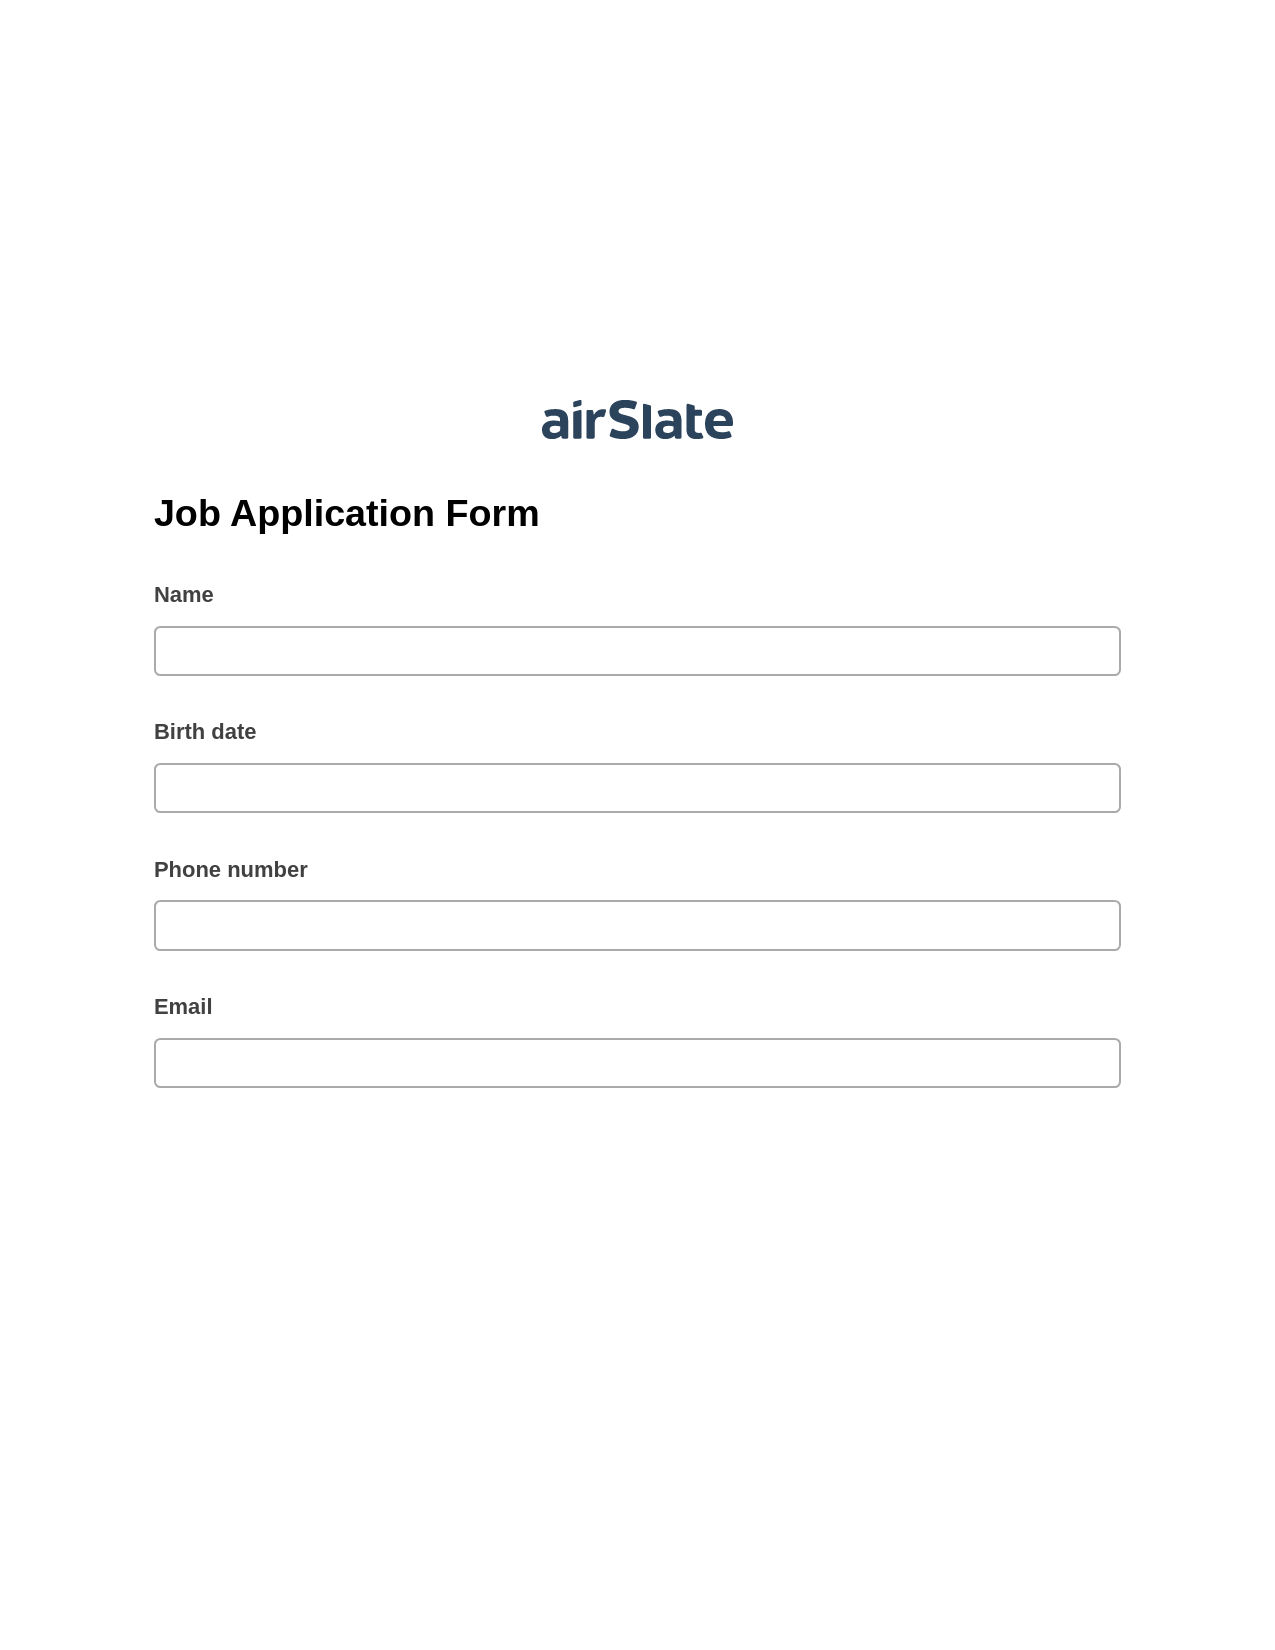 Job Application Form Pre-fill Slate from MS Dynamics 365 Records Bot, Pre-fill with Custom Data Bot, Google Drive Bot